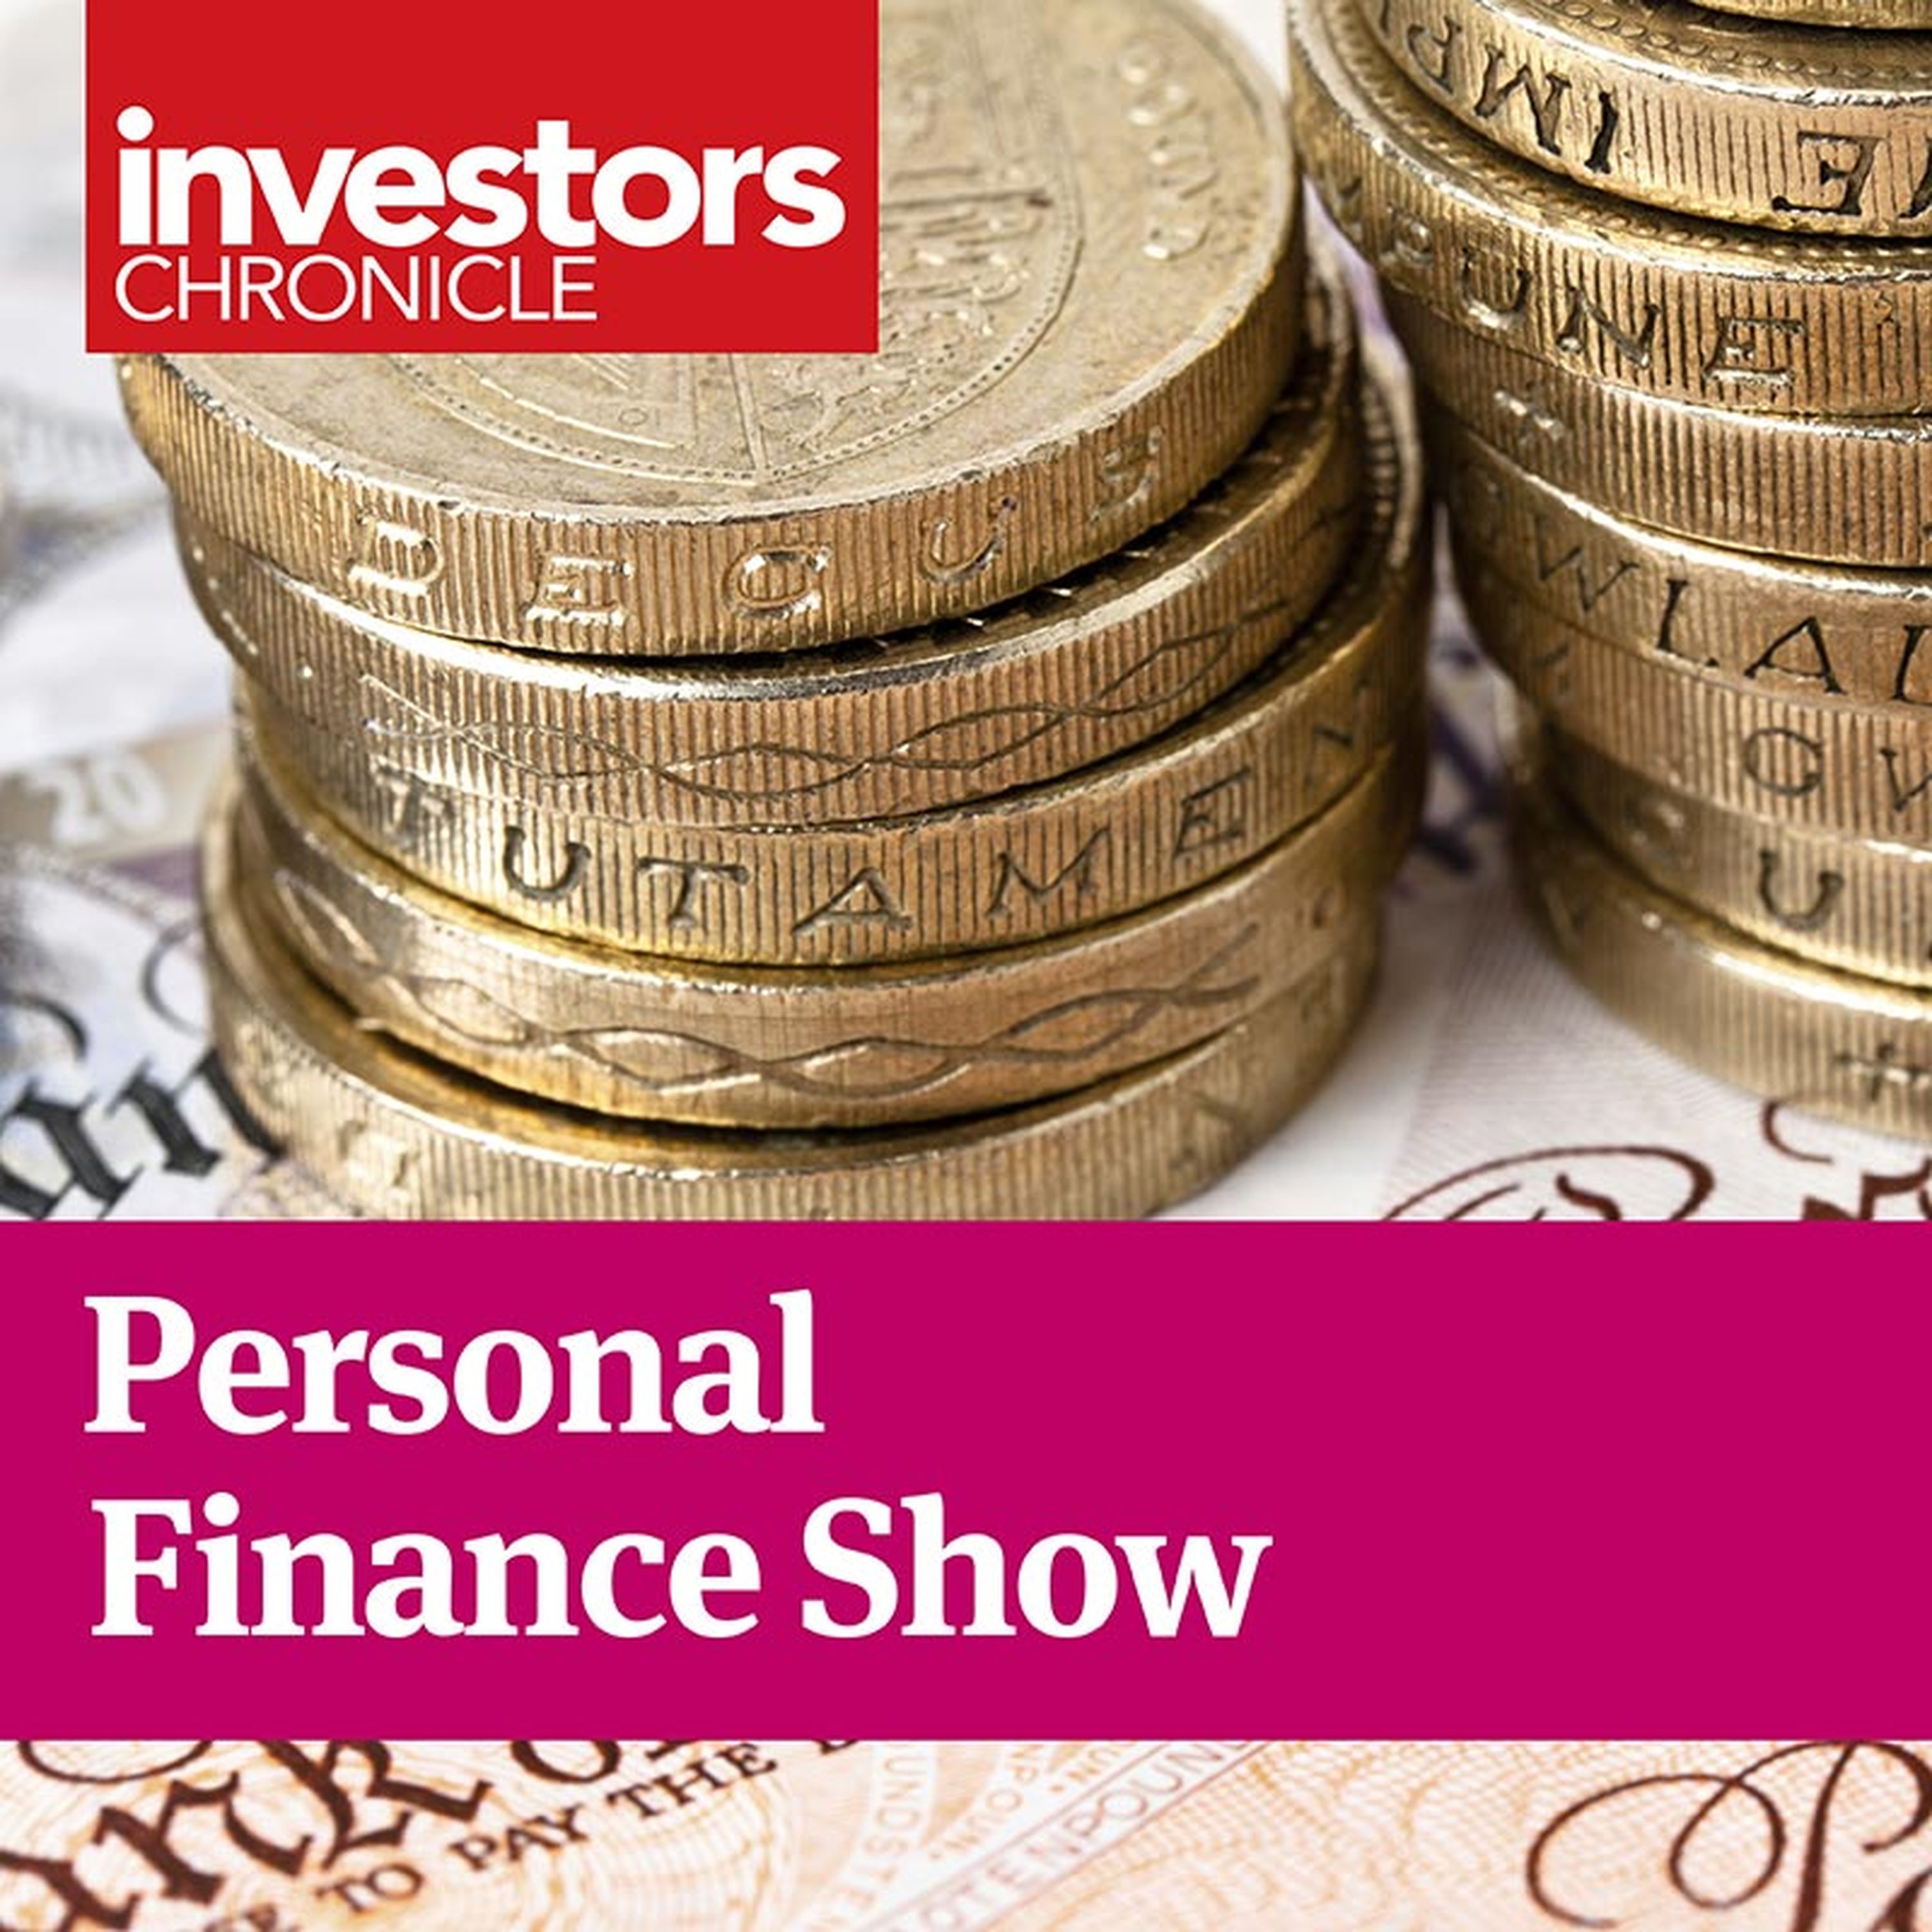 Personal Finance Show: Fund launch